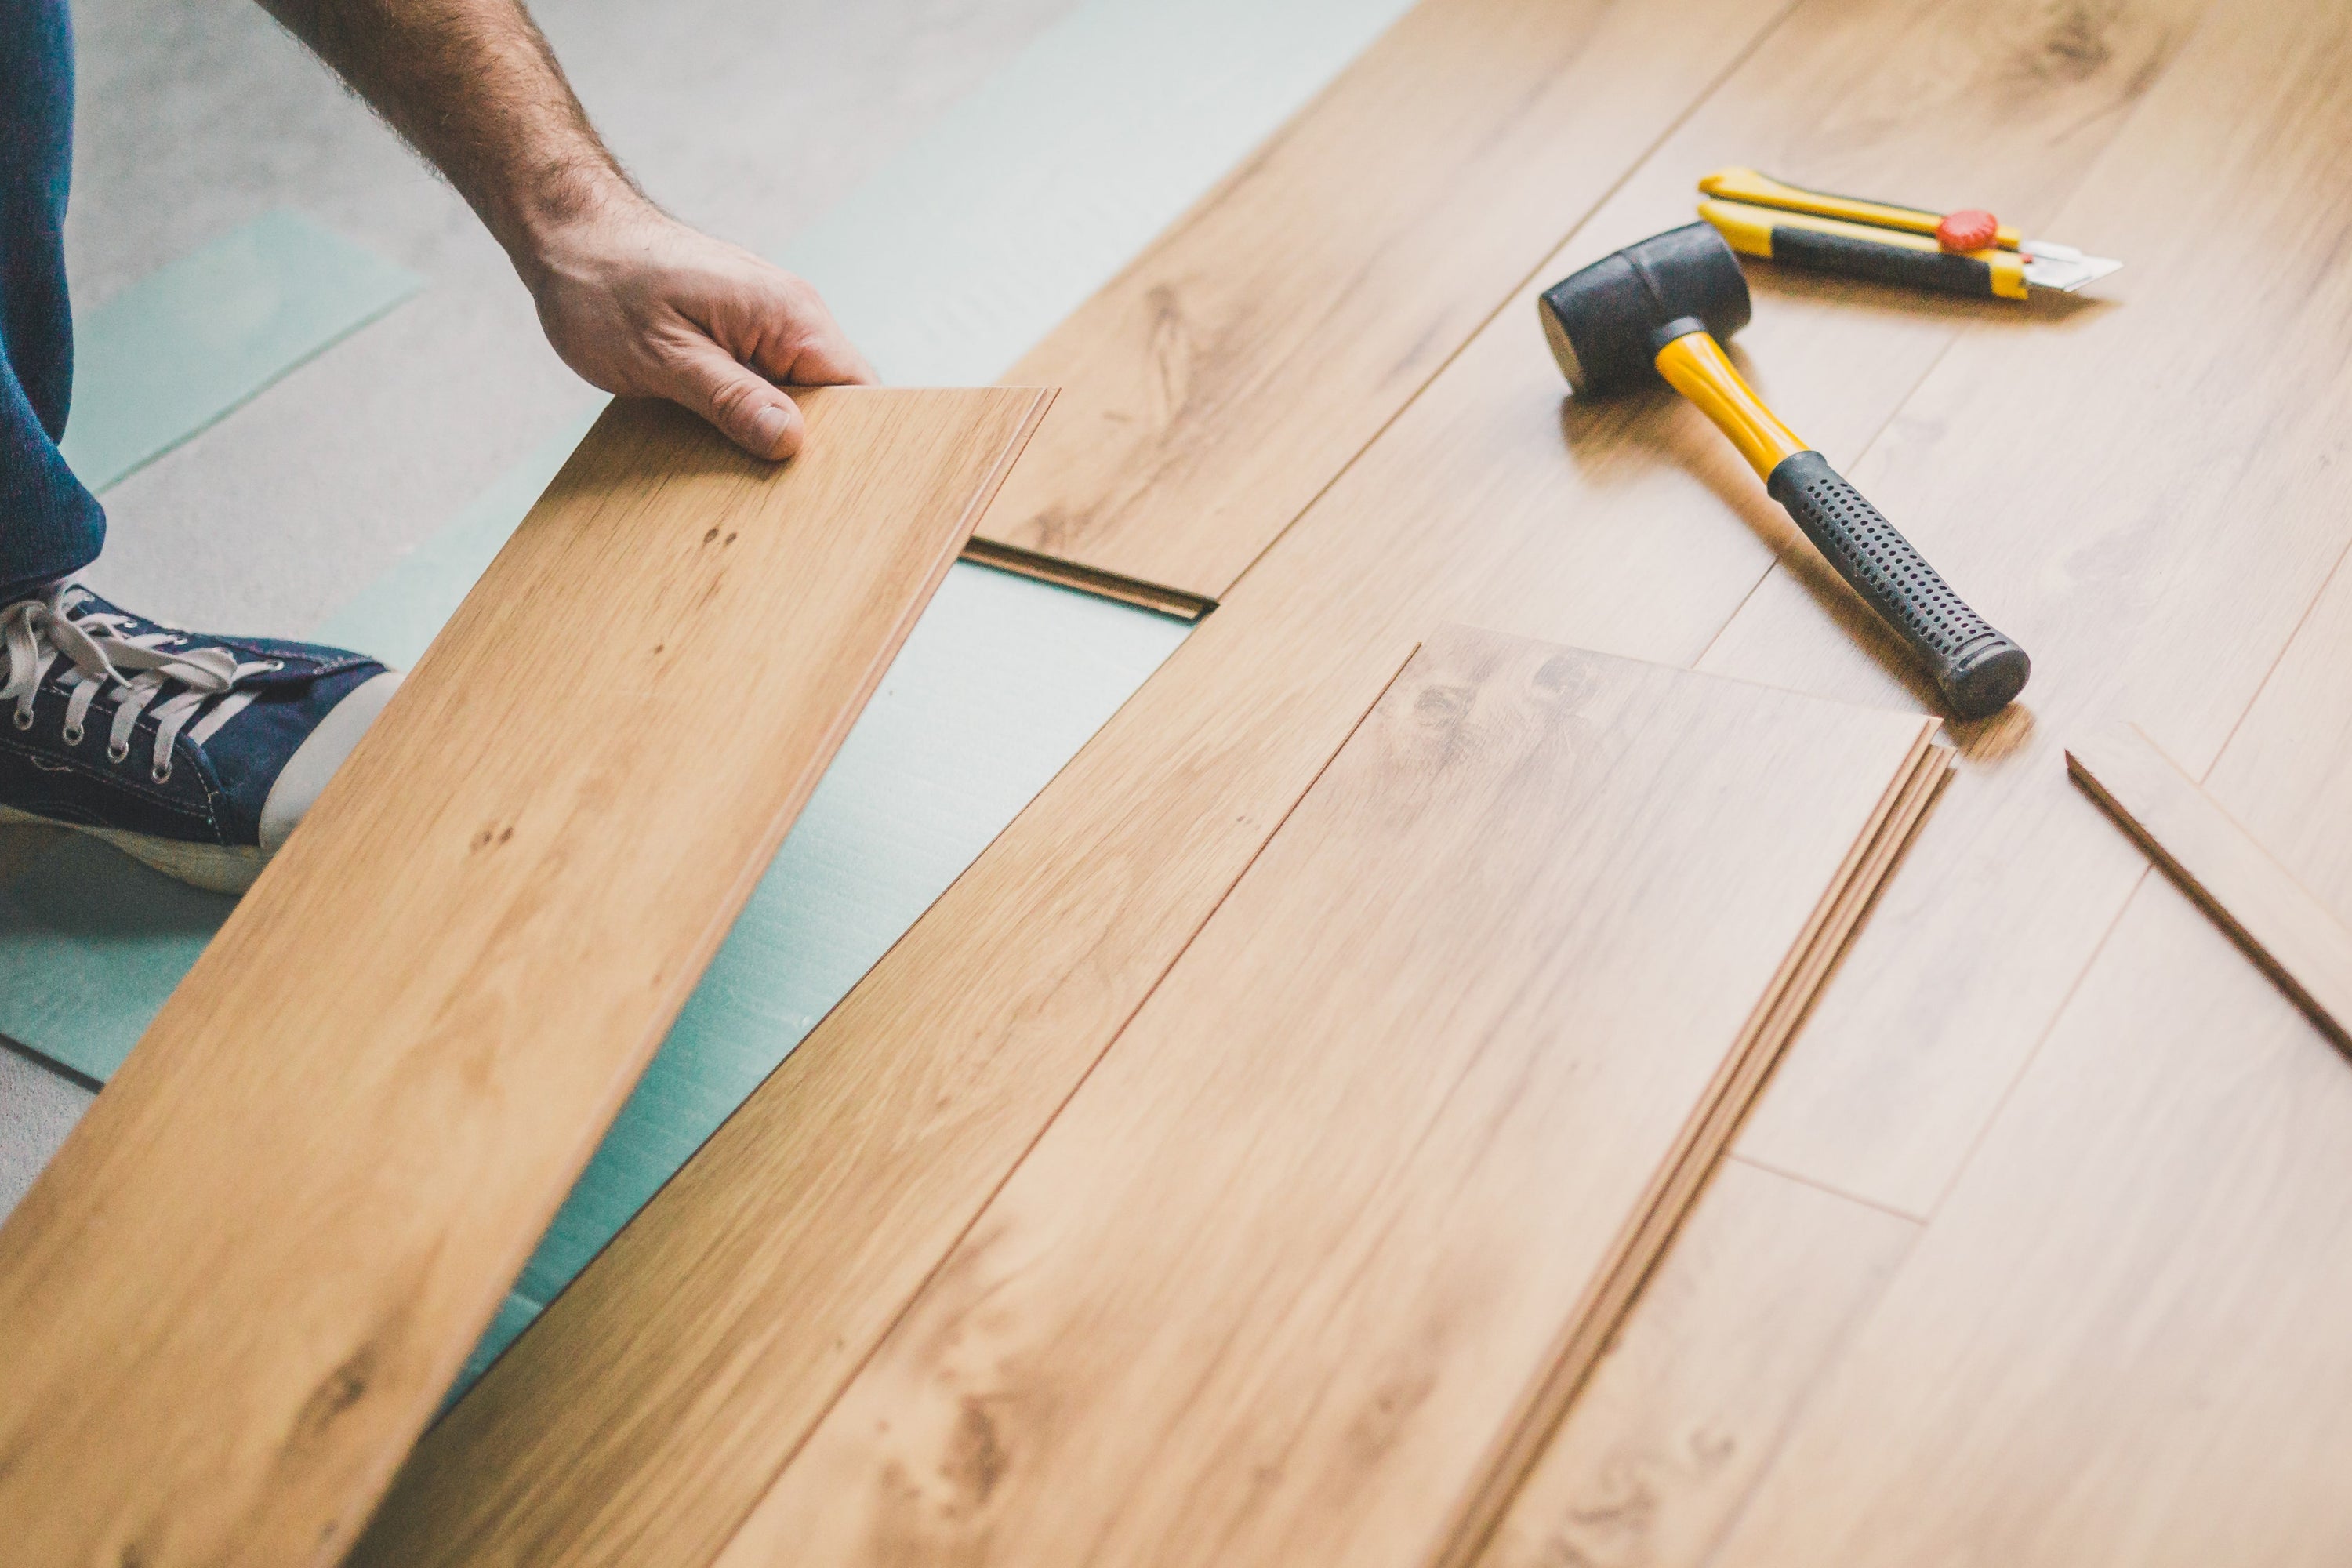 What is a Good Thickness for Engineered Hardwood Floors?